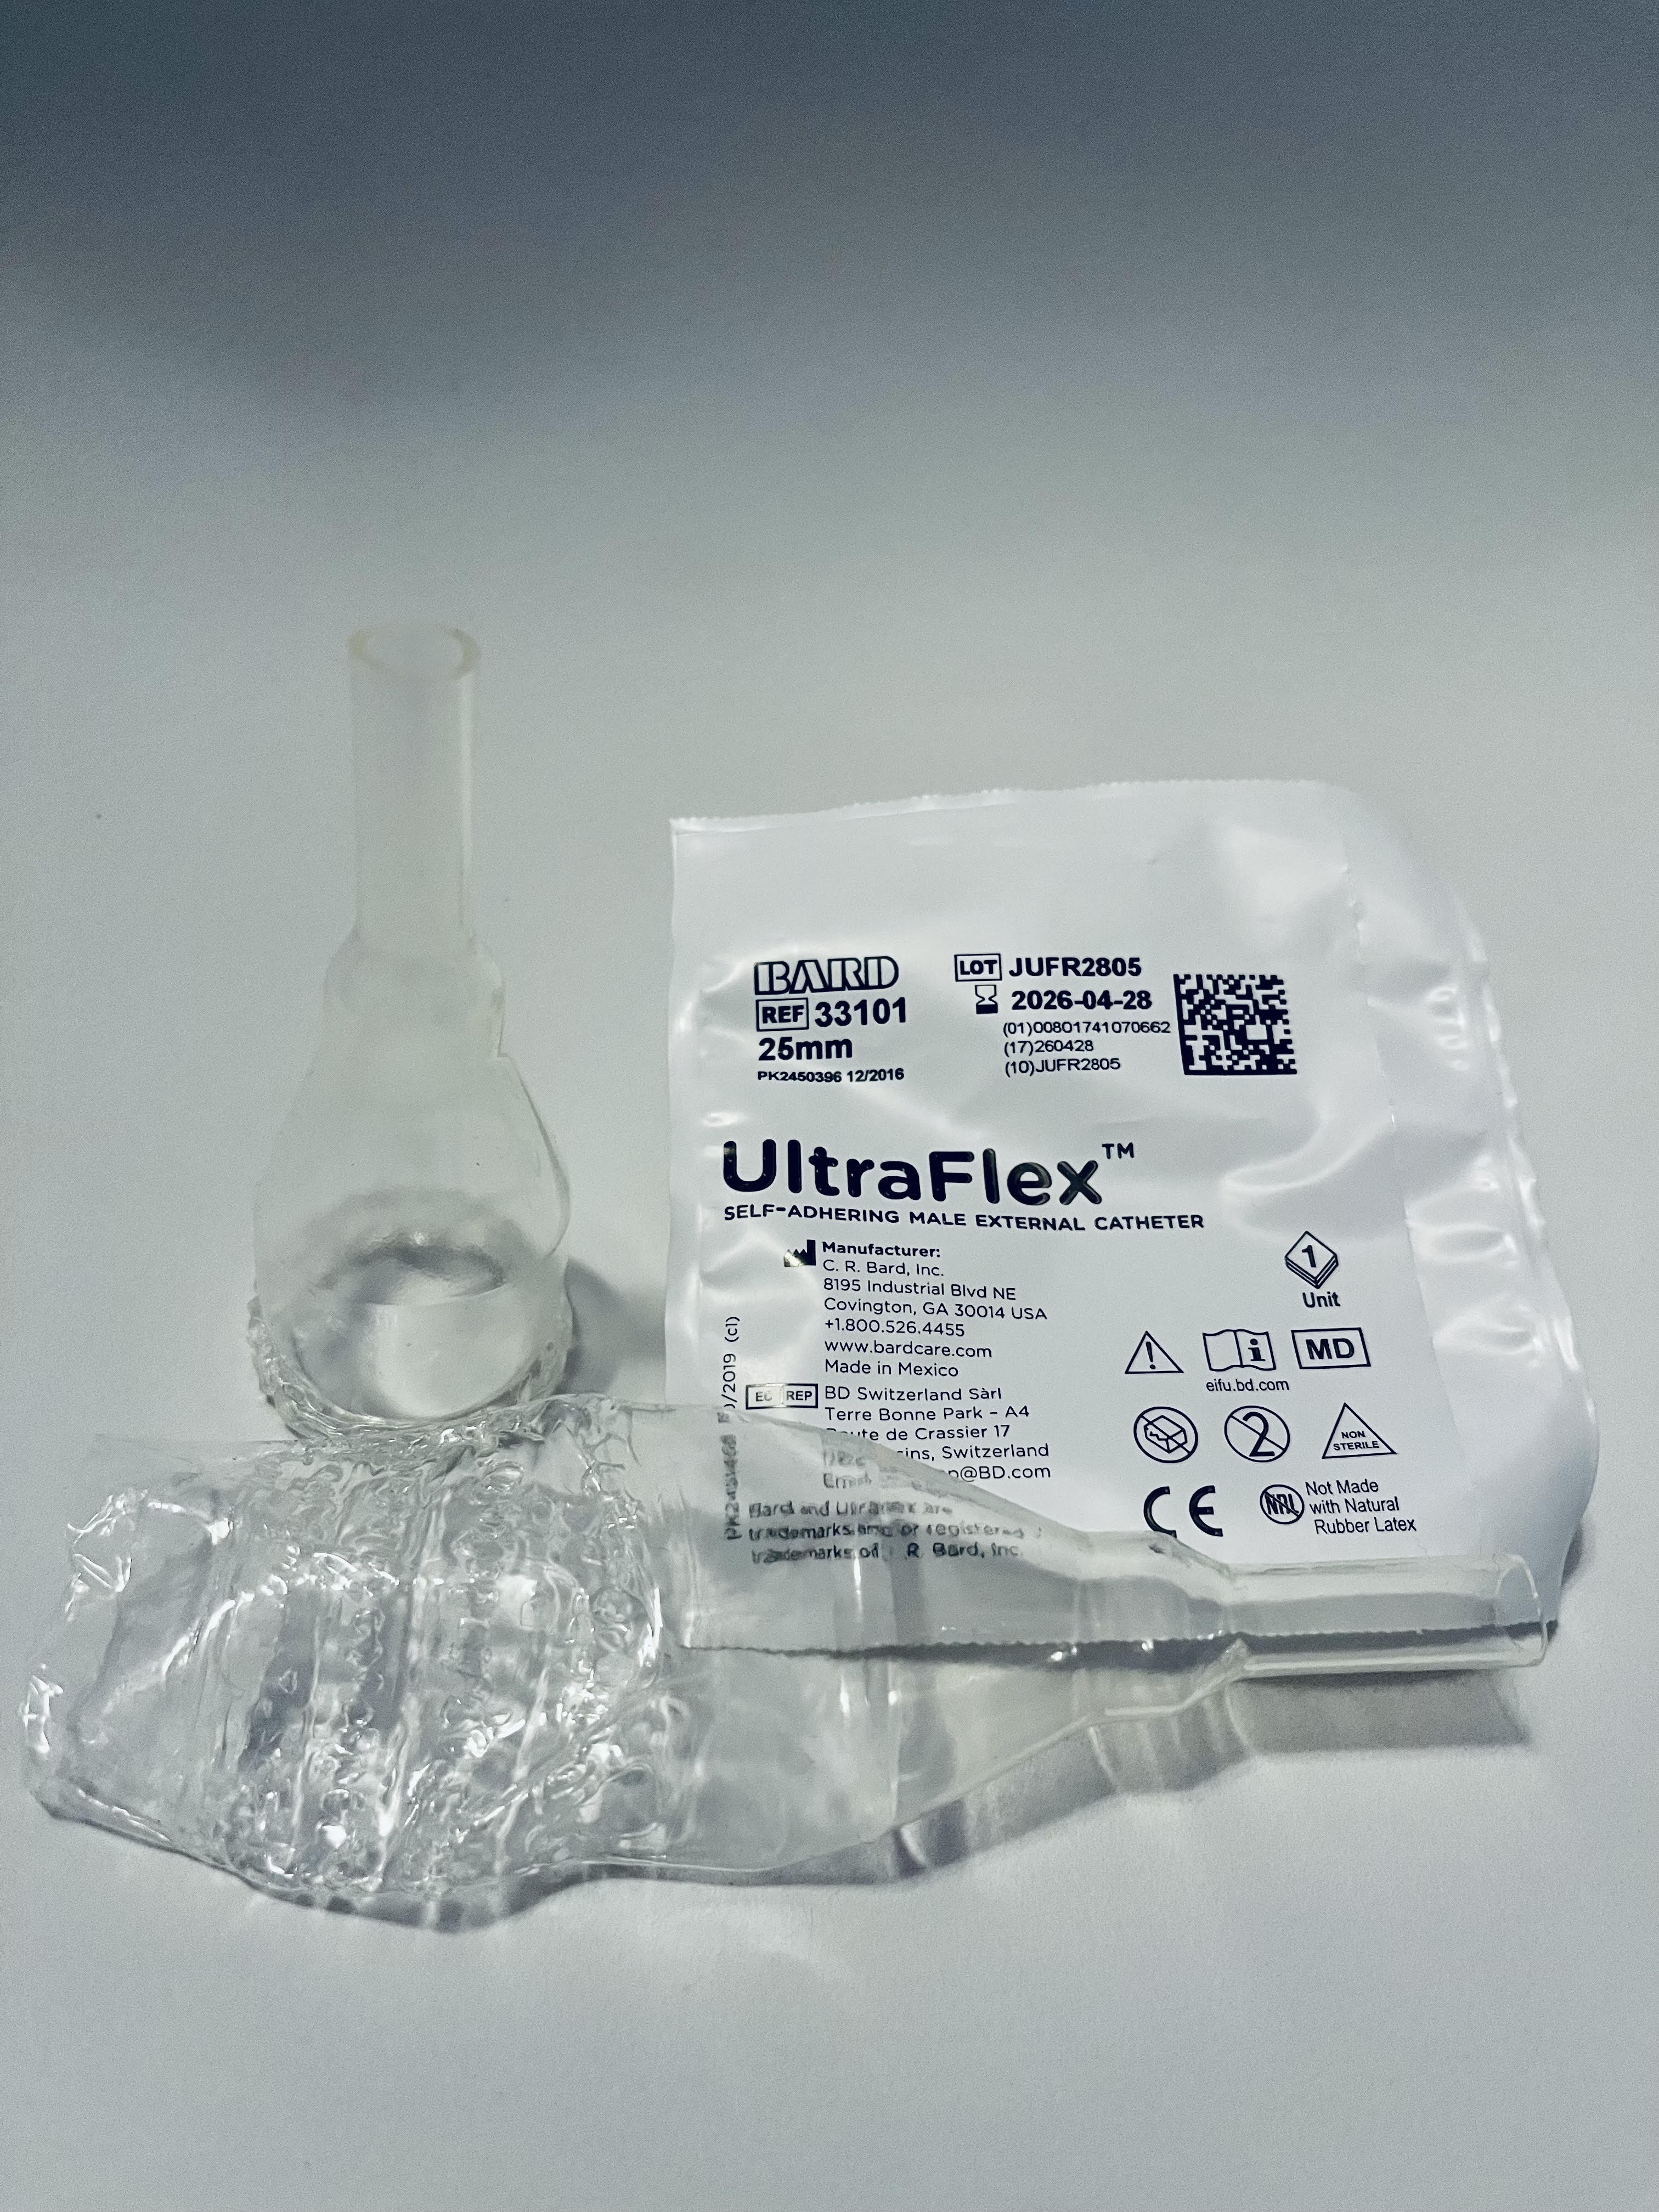 Urinary Kits 1-Week Kits 1-Week Urinary Incontinence  Kit (29mm UltraFlex) by Veteran Medical Supplies online store selling catheters, drainage bags, urinary kits centrally located in Kansas City Missouri shipping to the entire United States